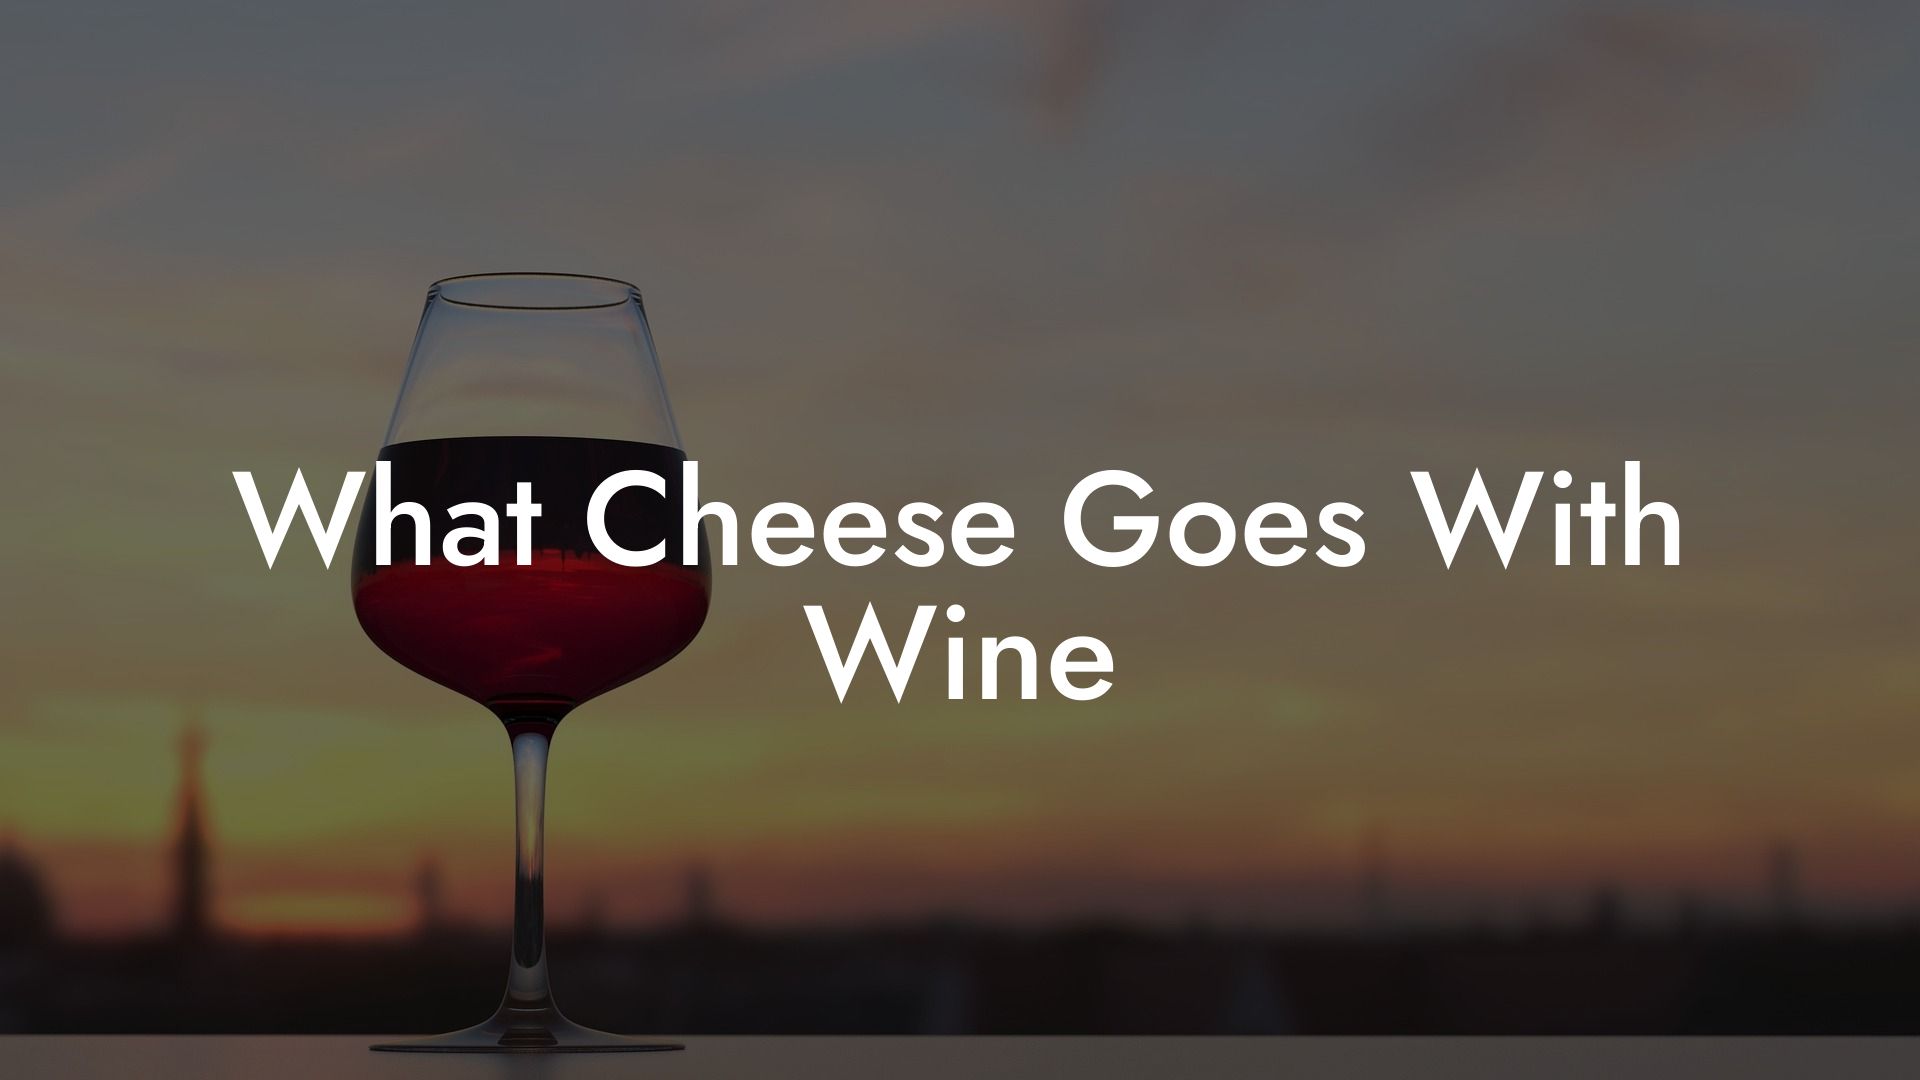 What Cheese Goes With Wine